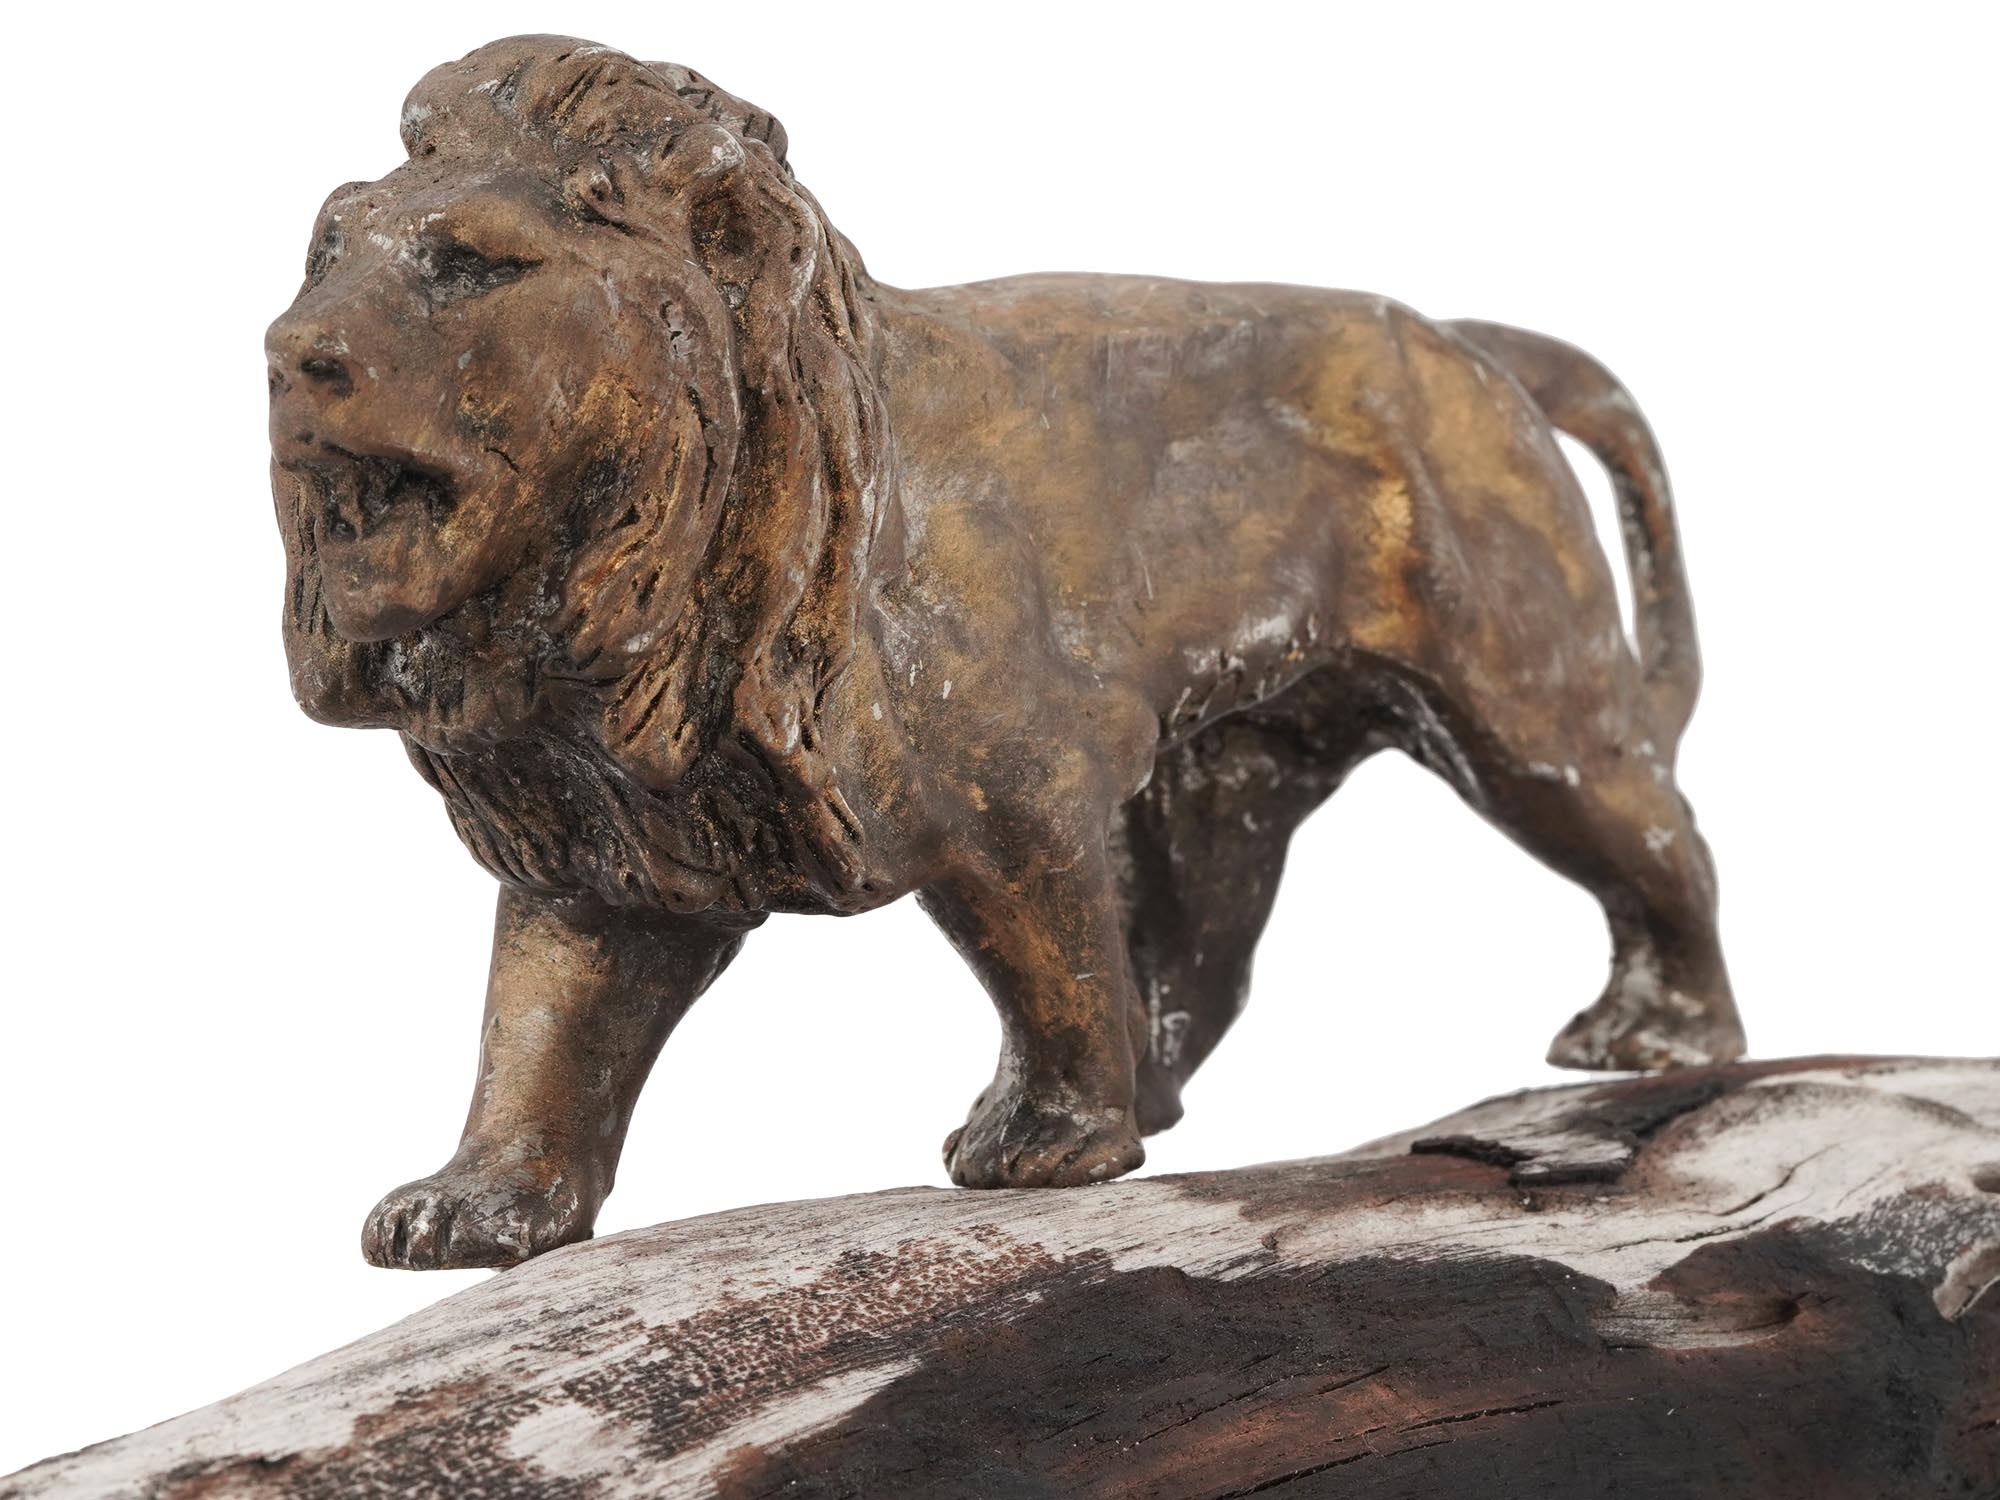 CAST BRONZE FIGURINE OF A LION ON WOODEN STAND PIC-6